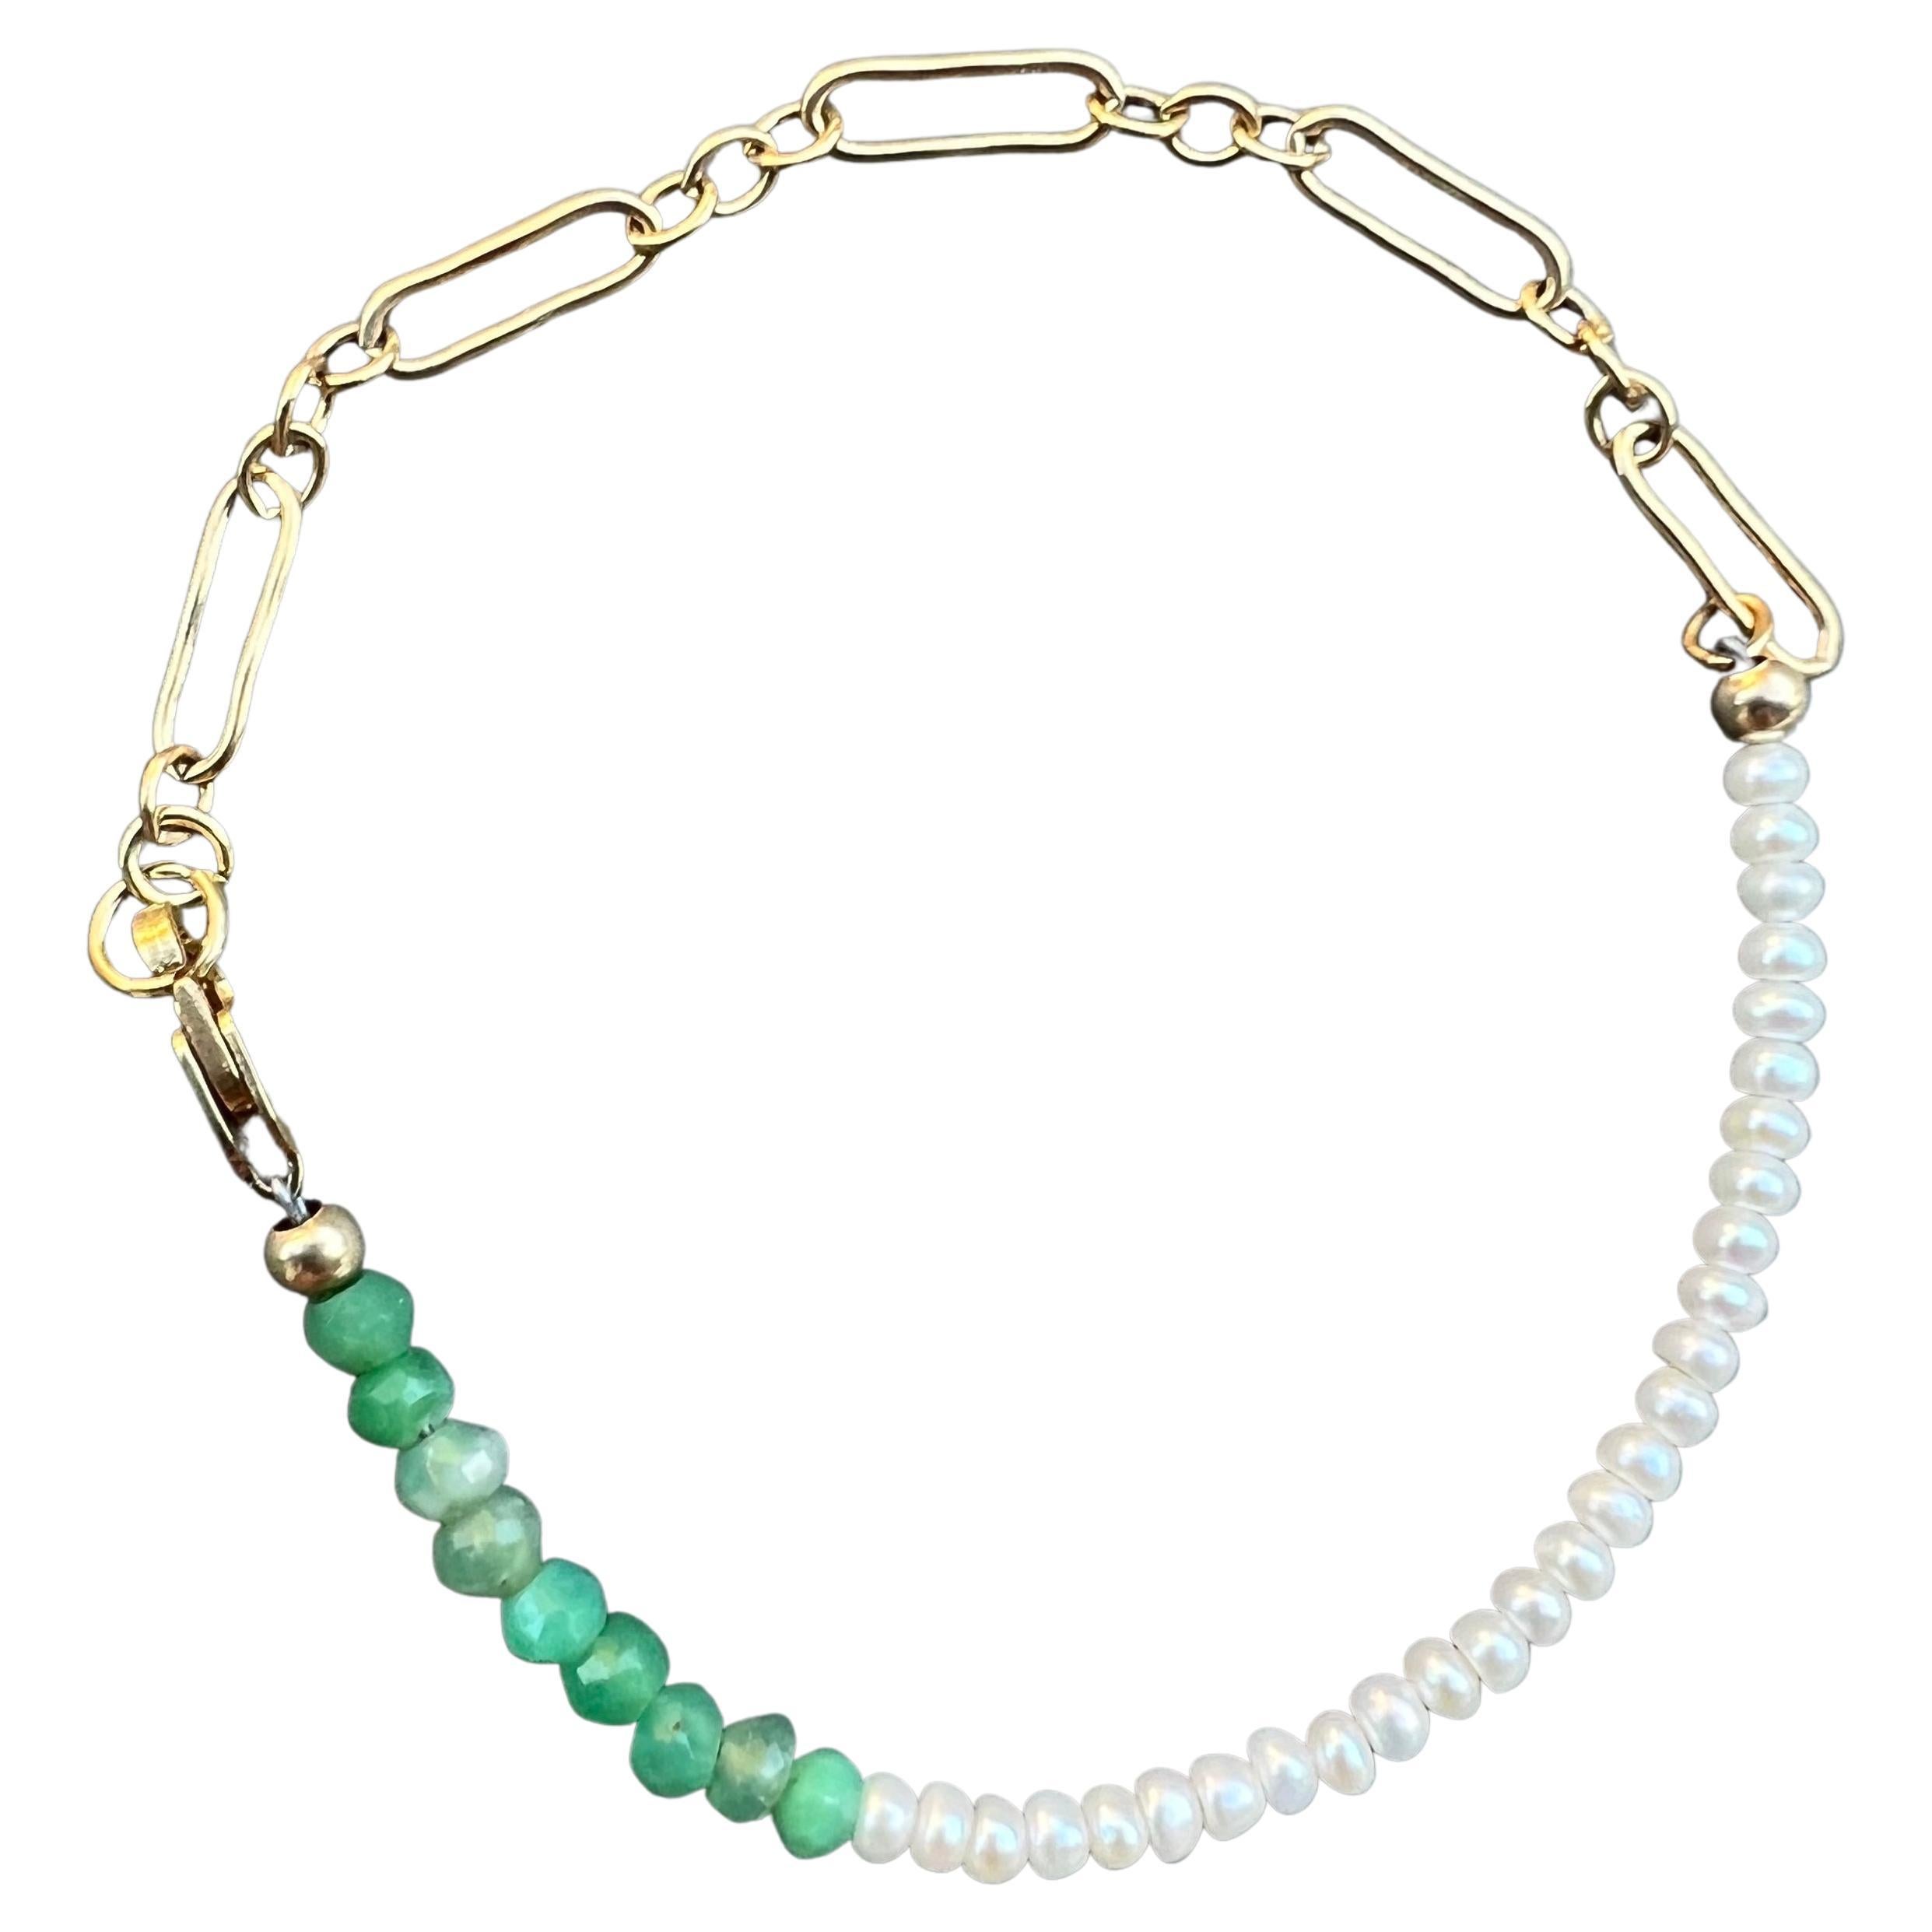 White Pearl Chrysoprase Bead Bracelet Gold Filled Chain J Dauphin For Sale